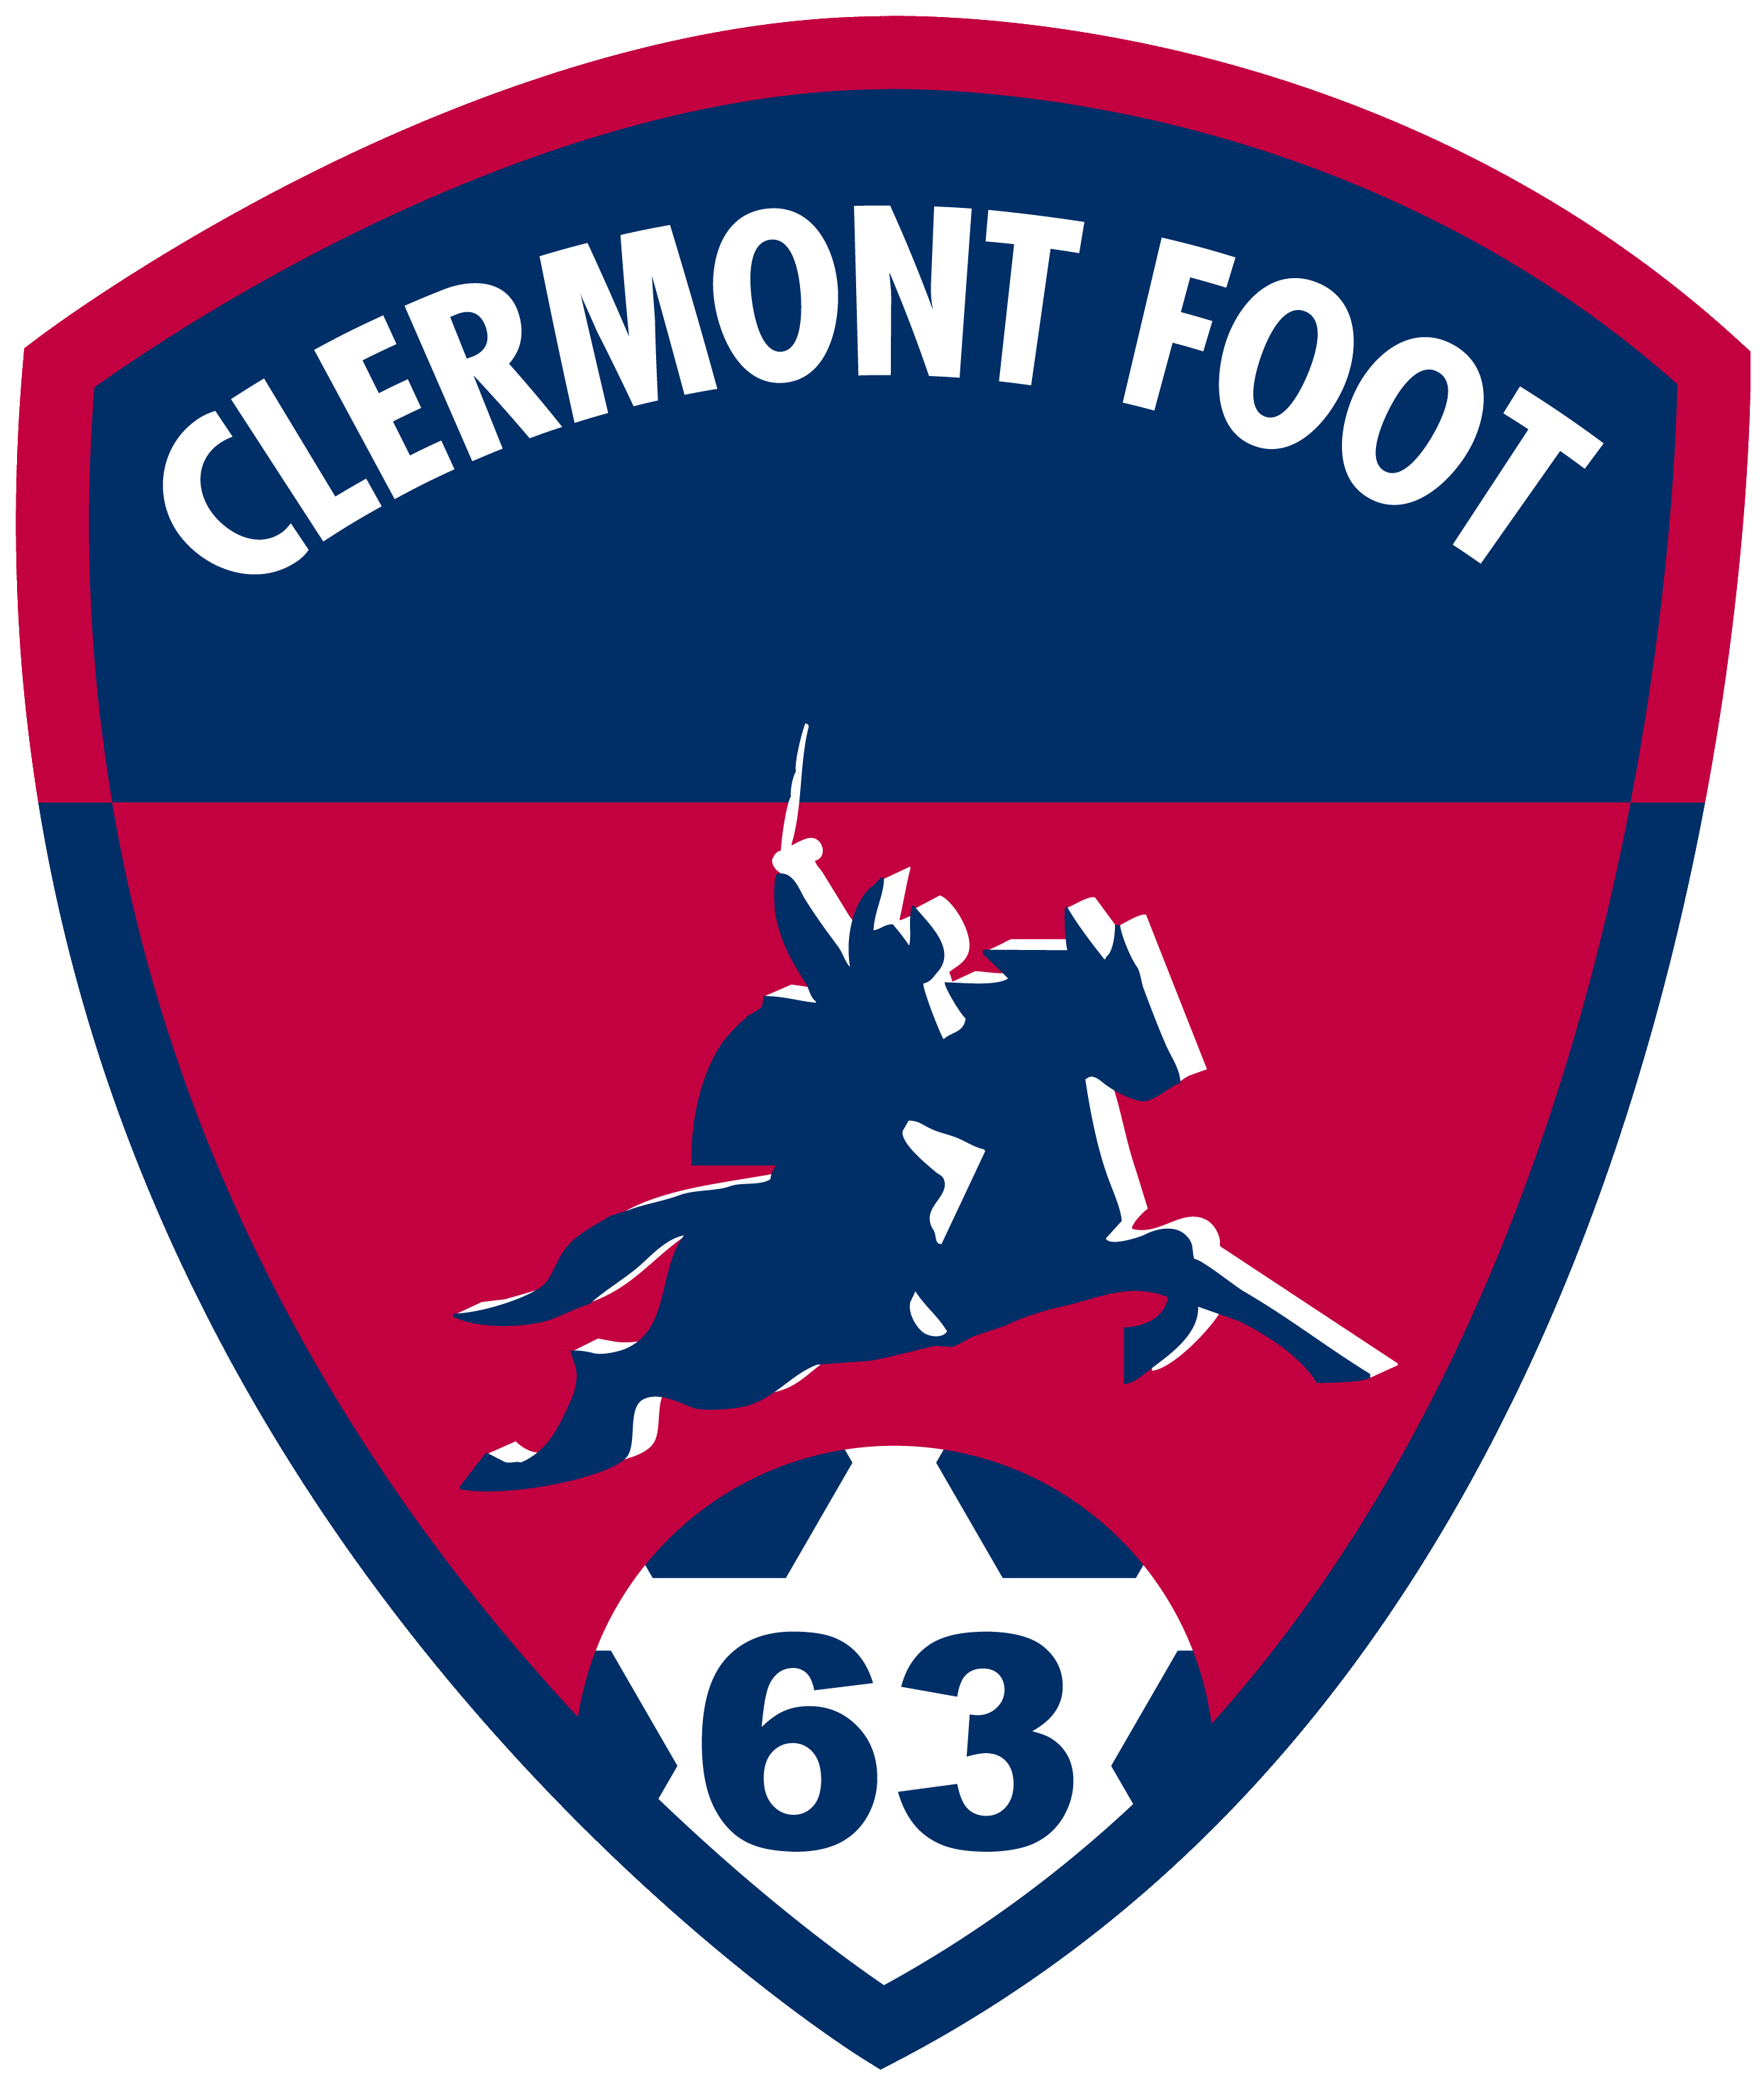 Clermont Foot vs Paris Saint Germain Prediction: Another scoring spree for the French Giants